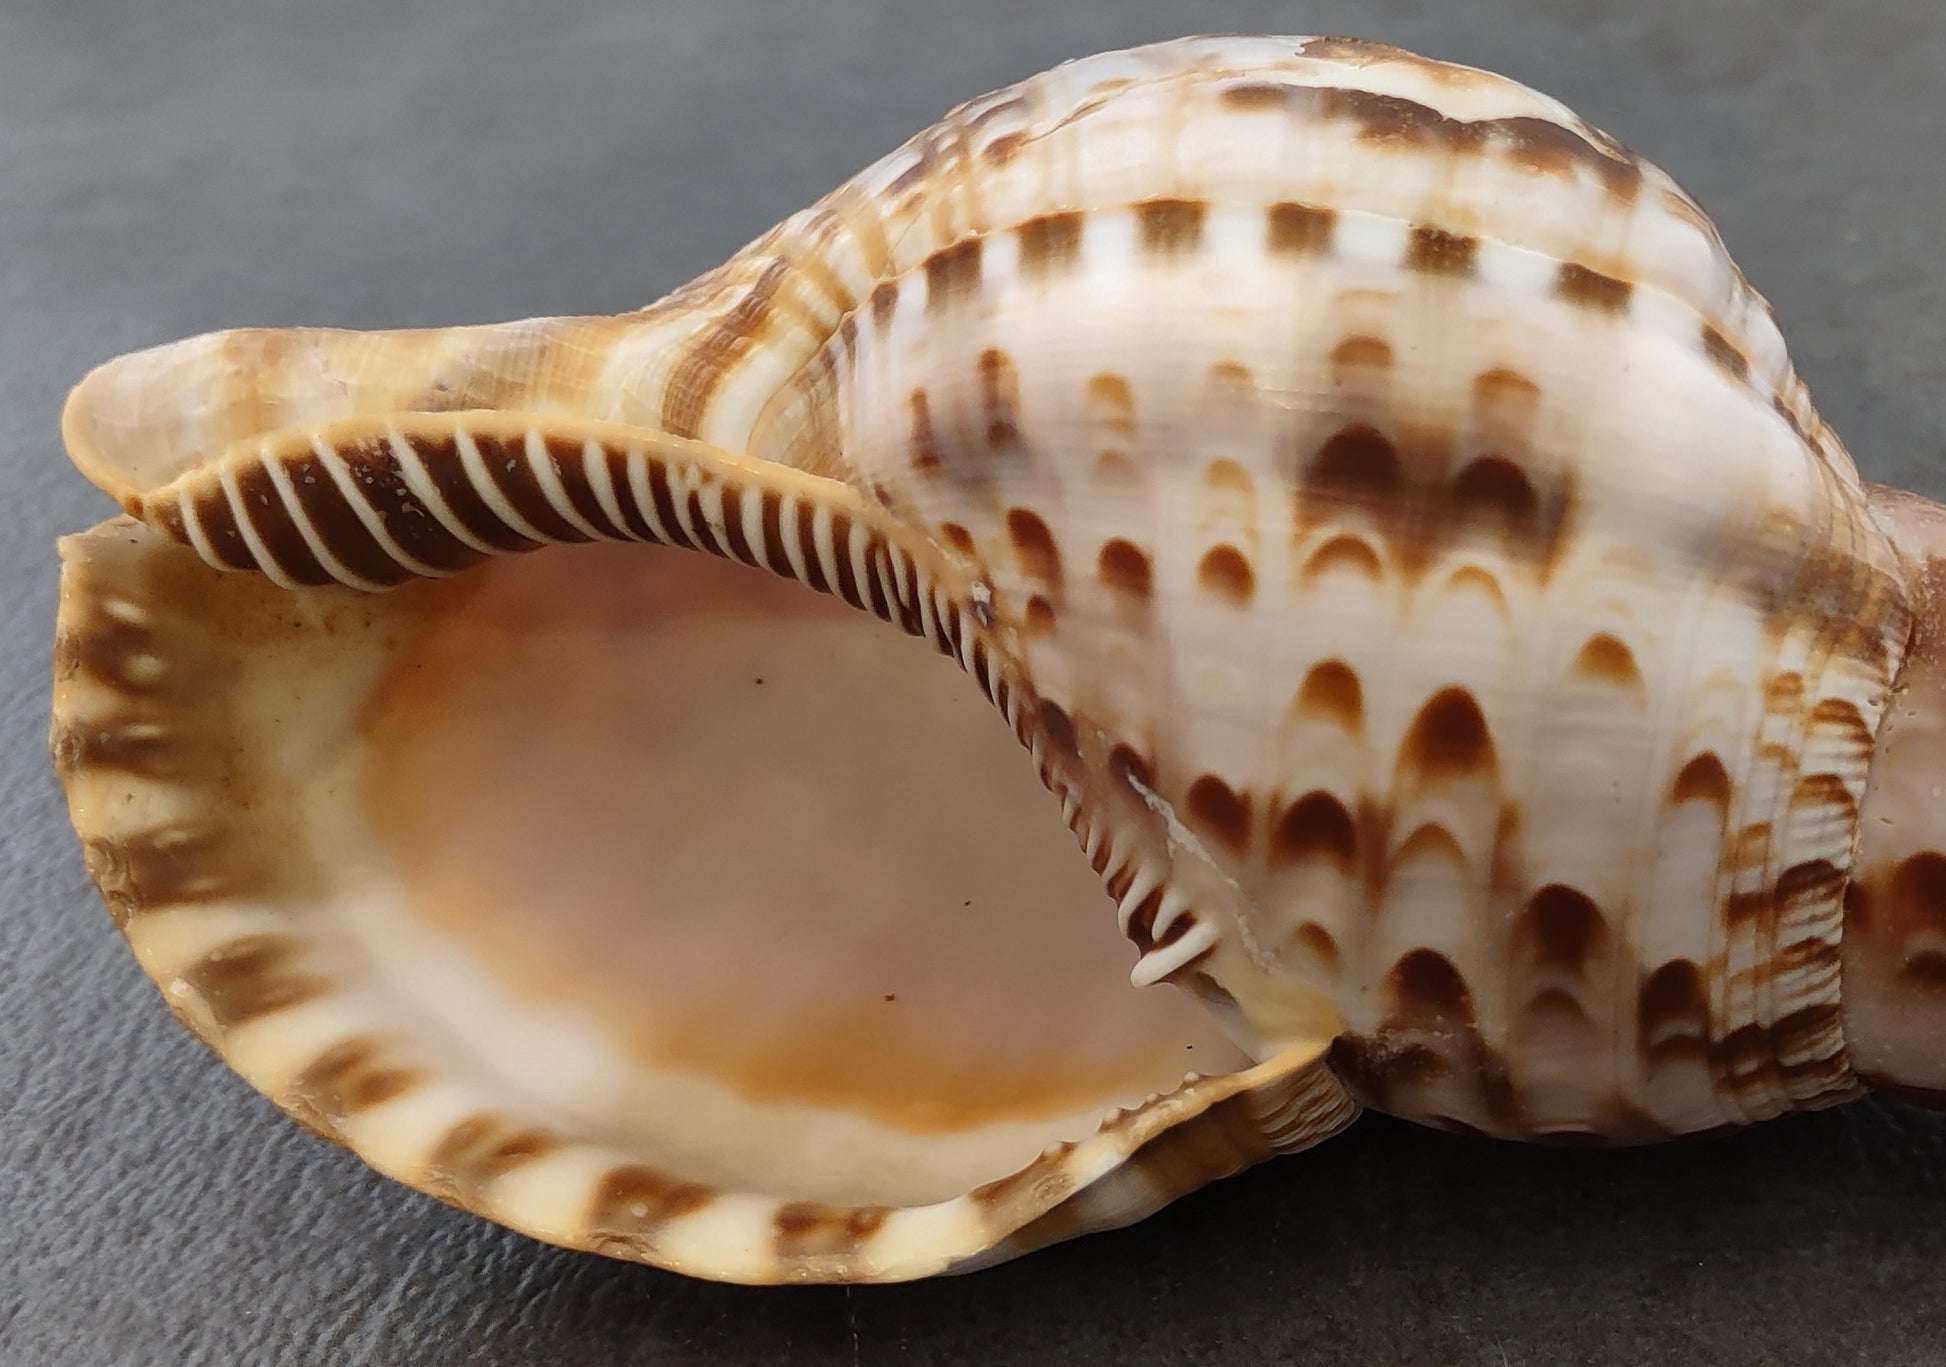 Caribbean Triton Seashell - Charonia Tritonis - (1 shell approx. 6-7 inches)  One brown and white spiral ribbed shell with medium opening. Copyright 2022 SeaShellSupply.com.